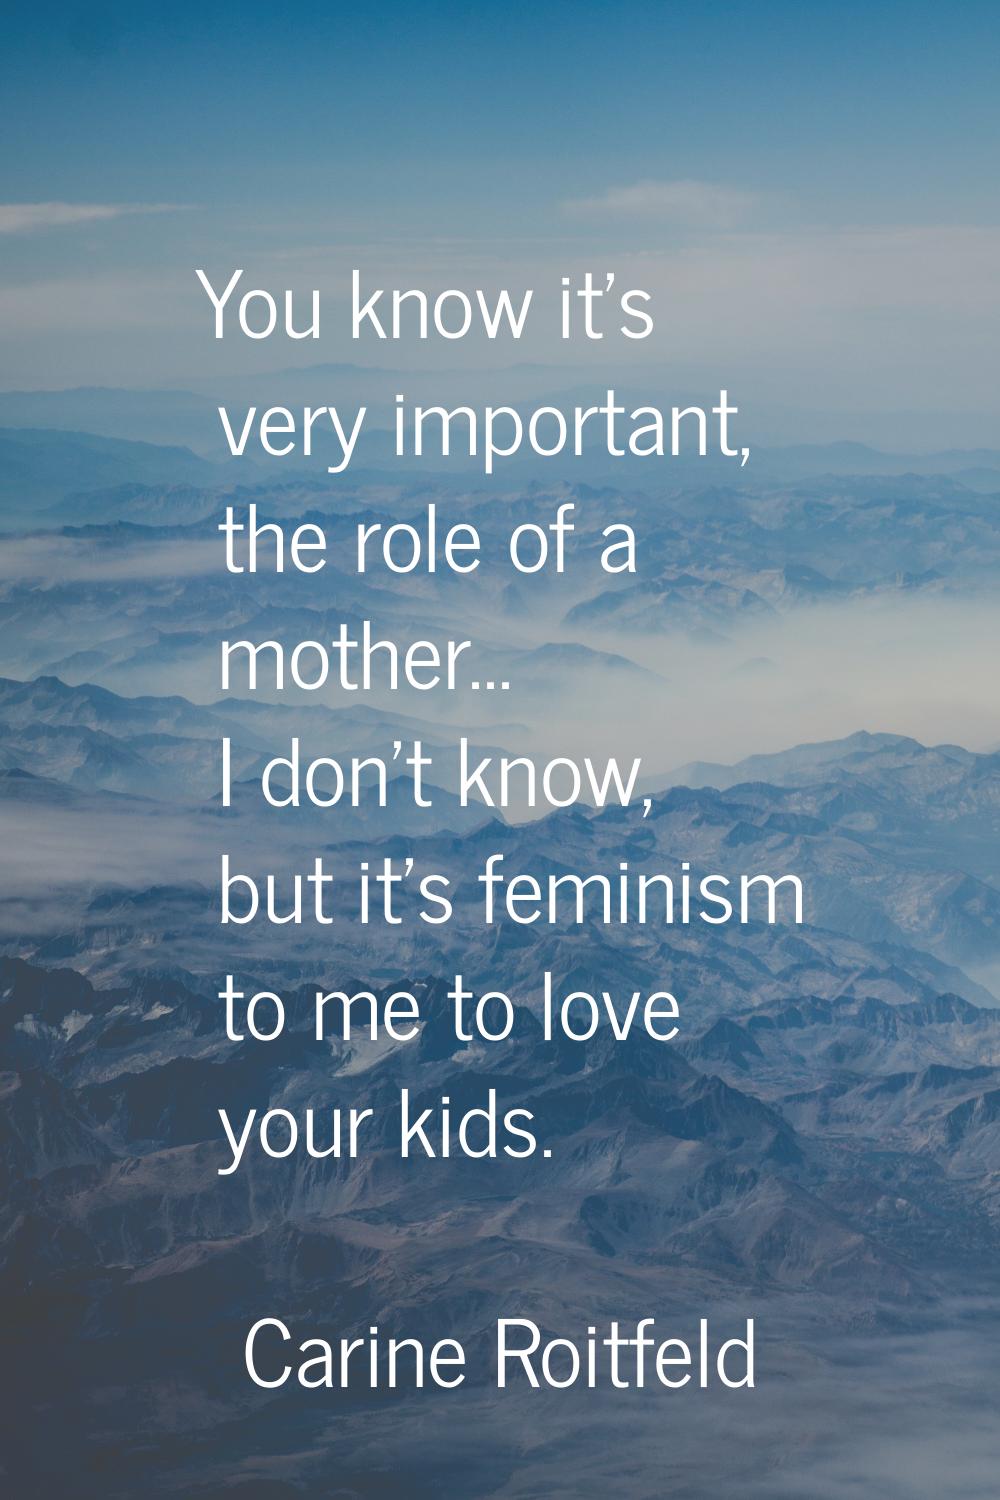 You know it's very important, the role of a mother... I don't know, but it's feminism to me to love